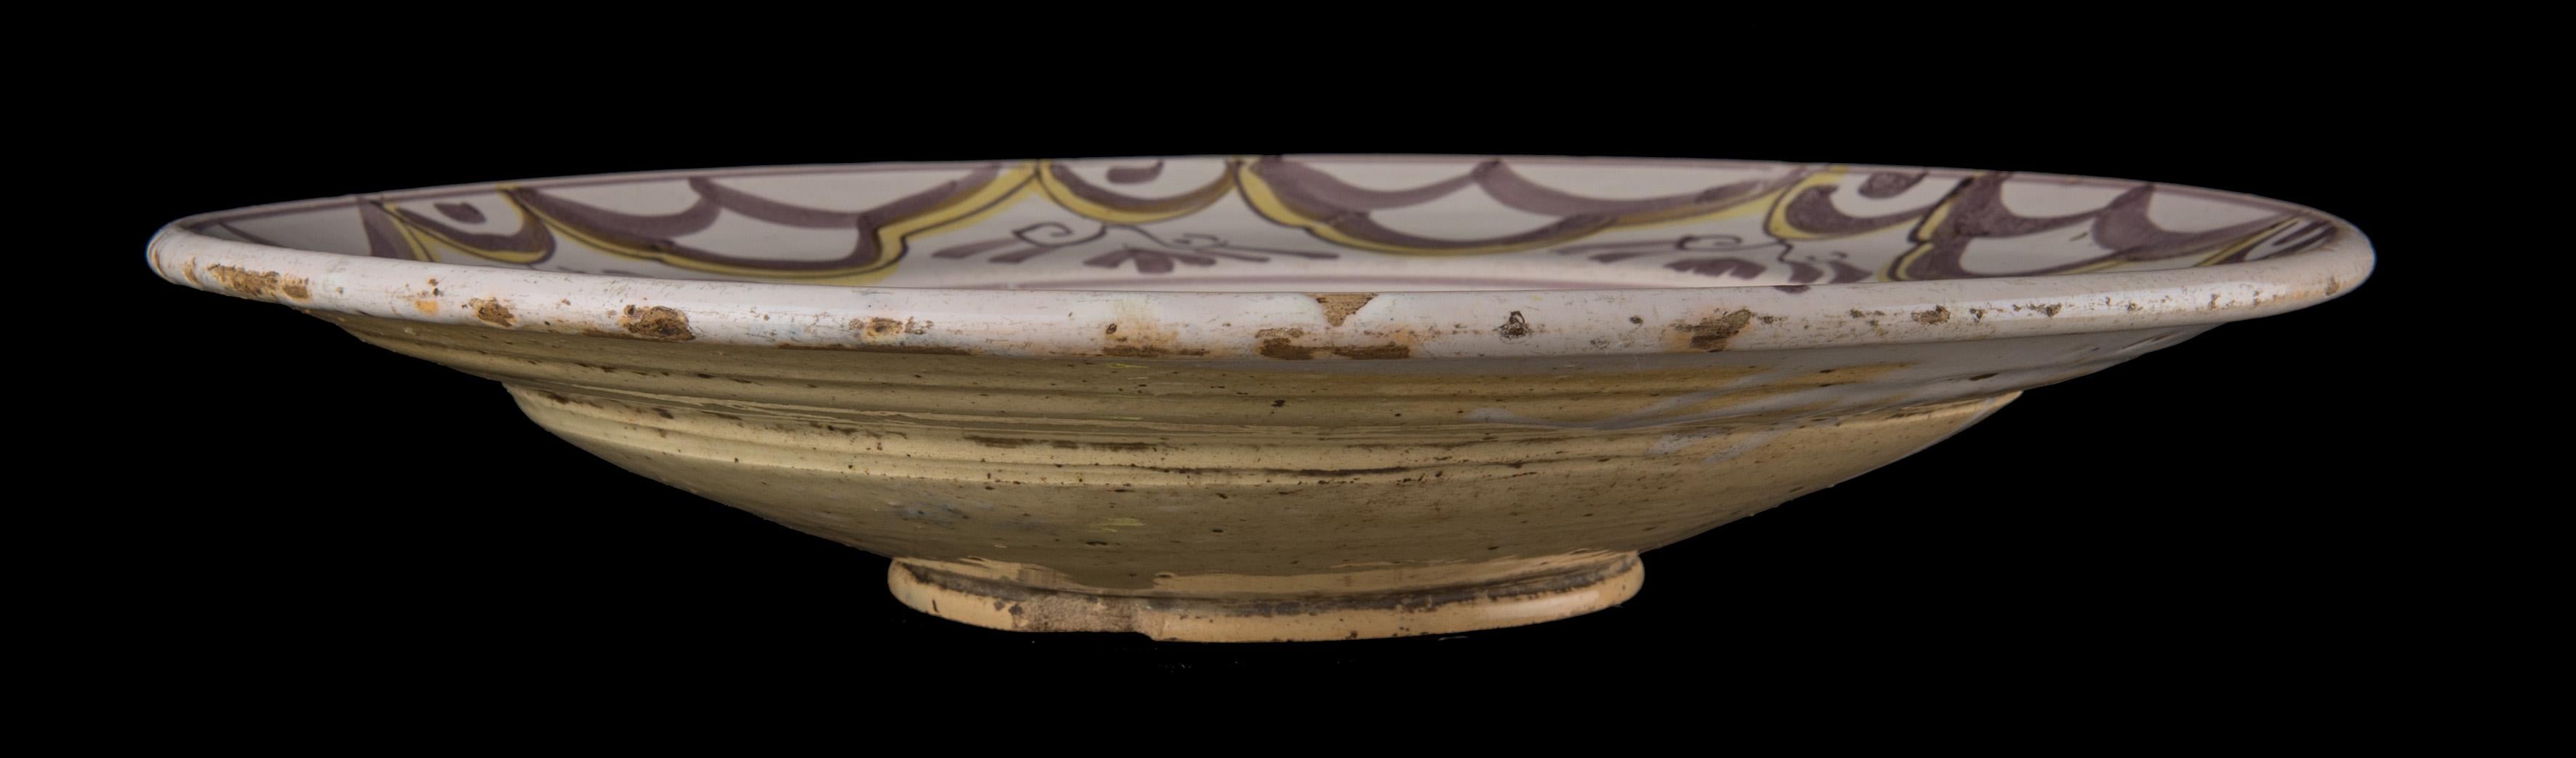 Glazed Purple and Yellow Majolica Charger with a Beggar the Netherlands, 1675-1700 For Sale